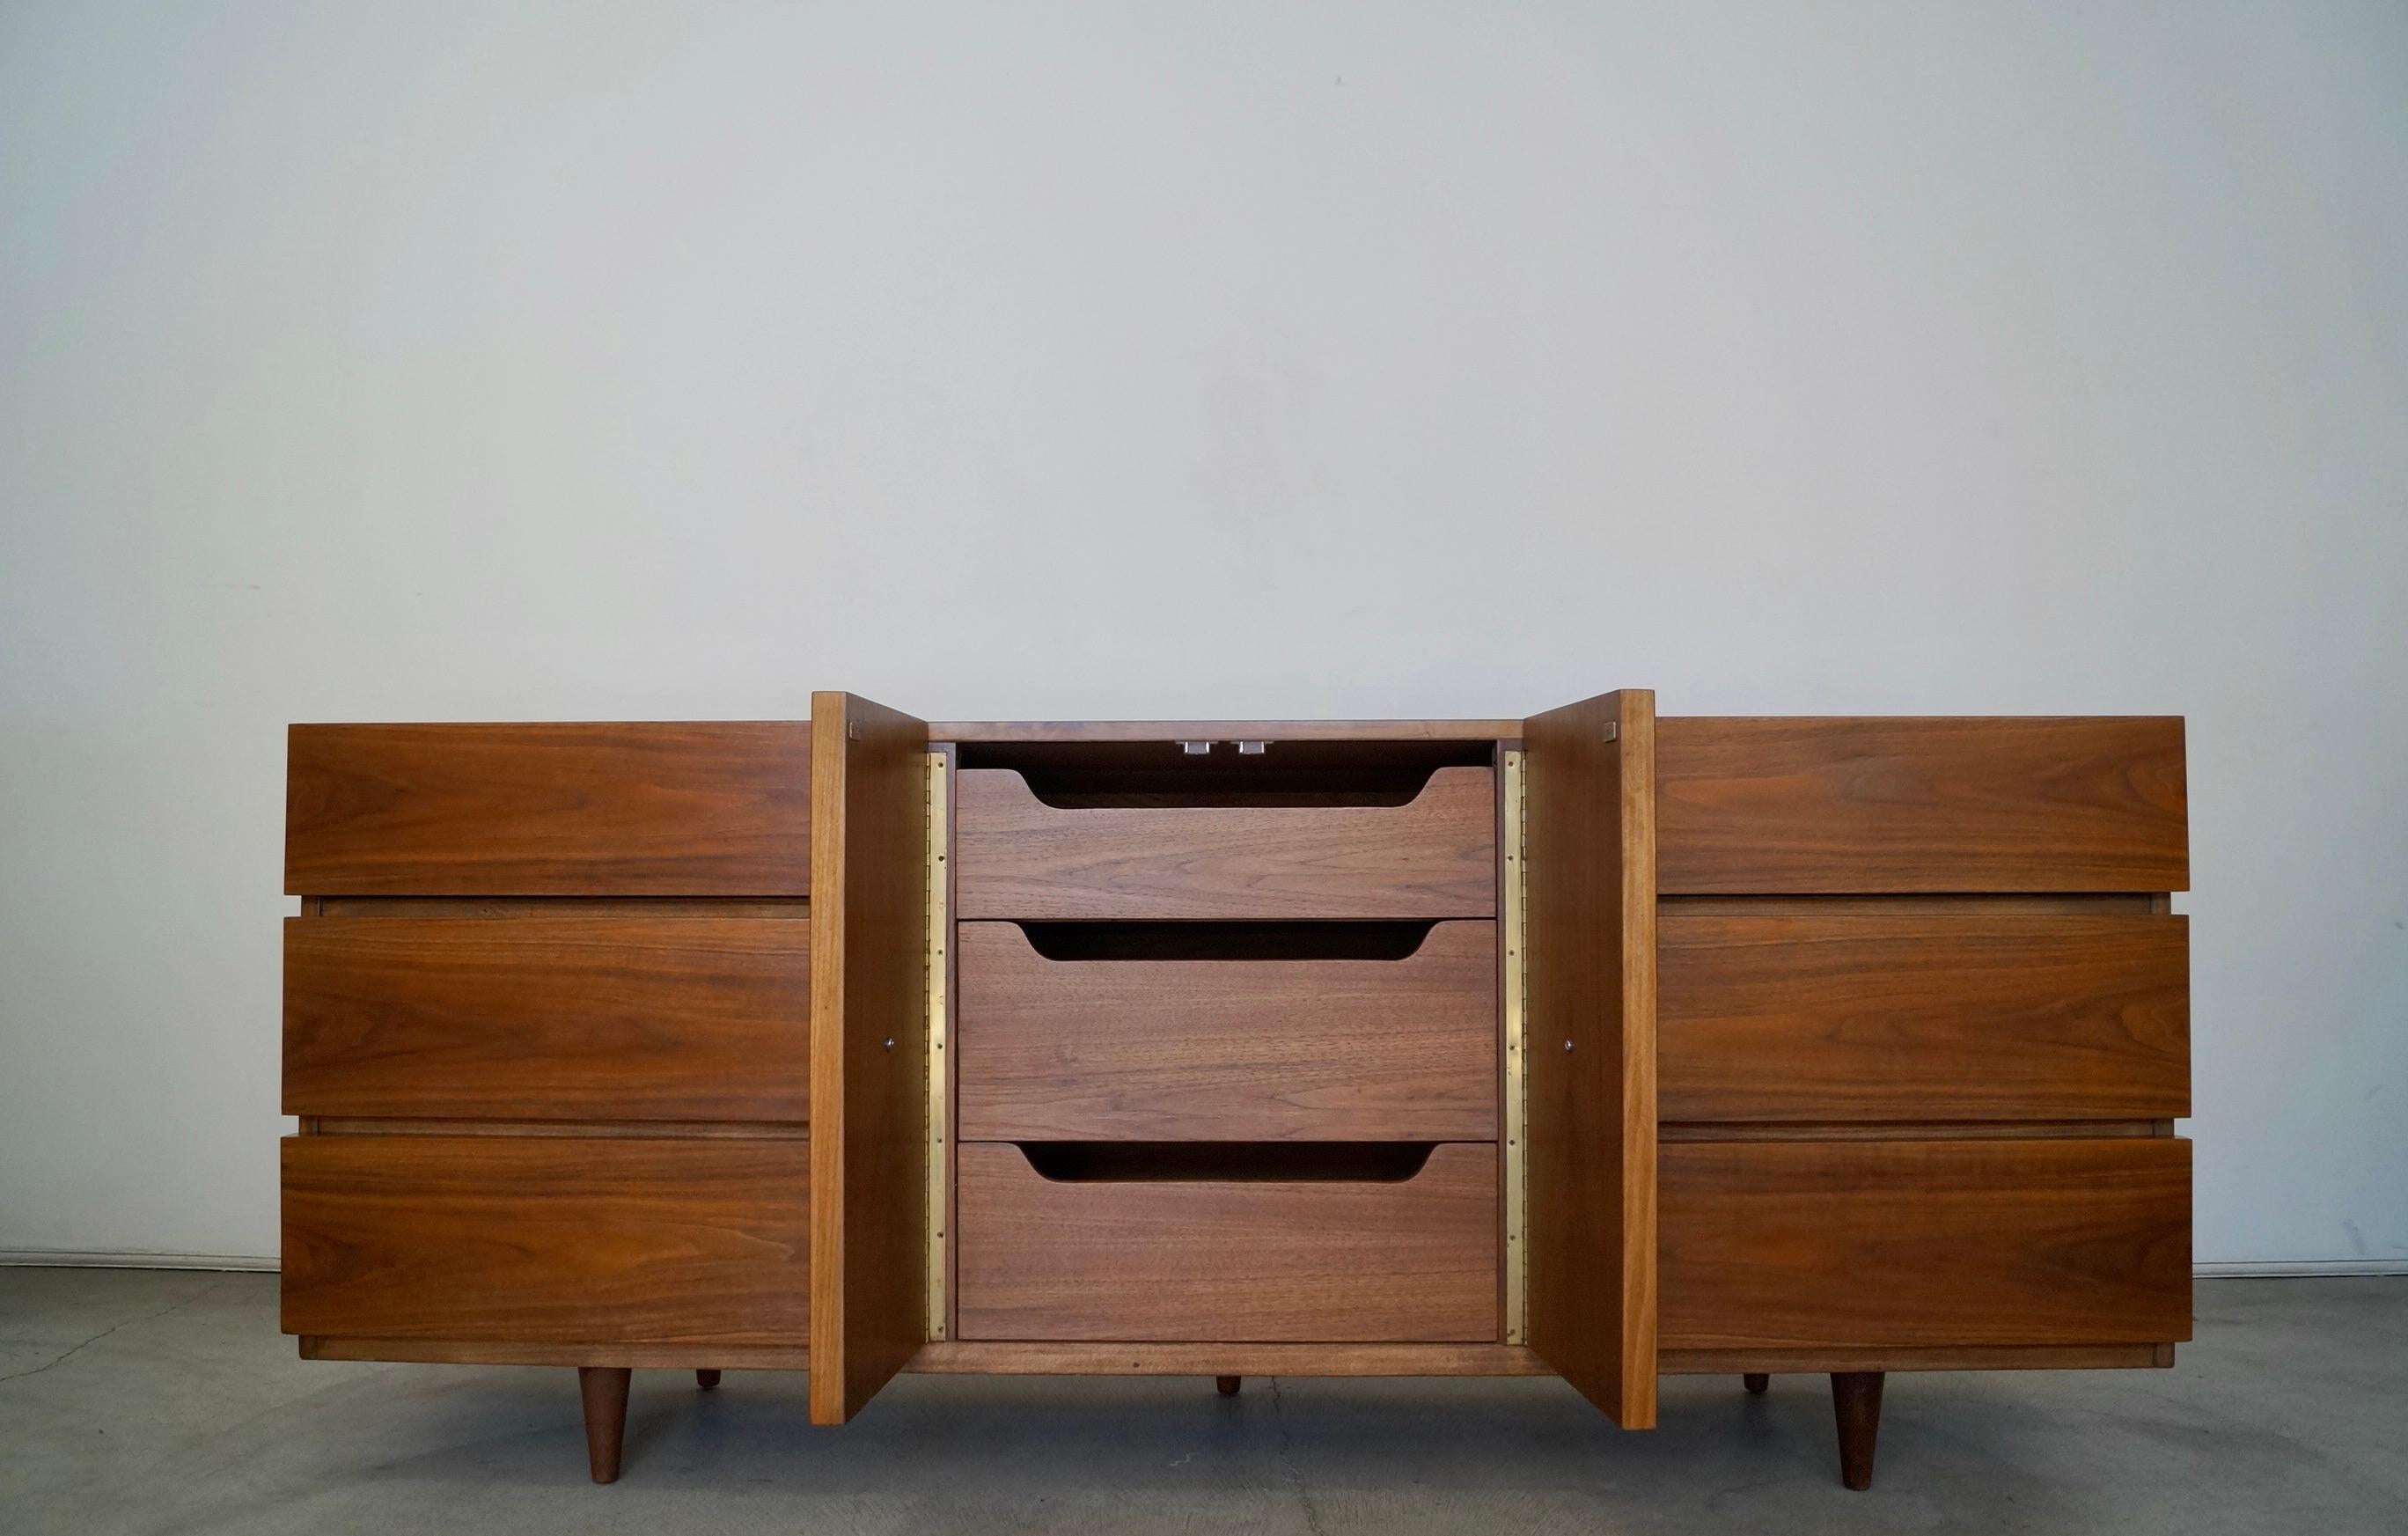 Vintage Mid-Century Modern lowboy dresser / credenza for sale. Manufactured by American of Martinsville, and has been professionally refinished. It's made of walnut, and has beautiful walnut grain throughout. The middle credenza cabinet doors open